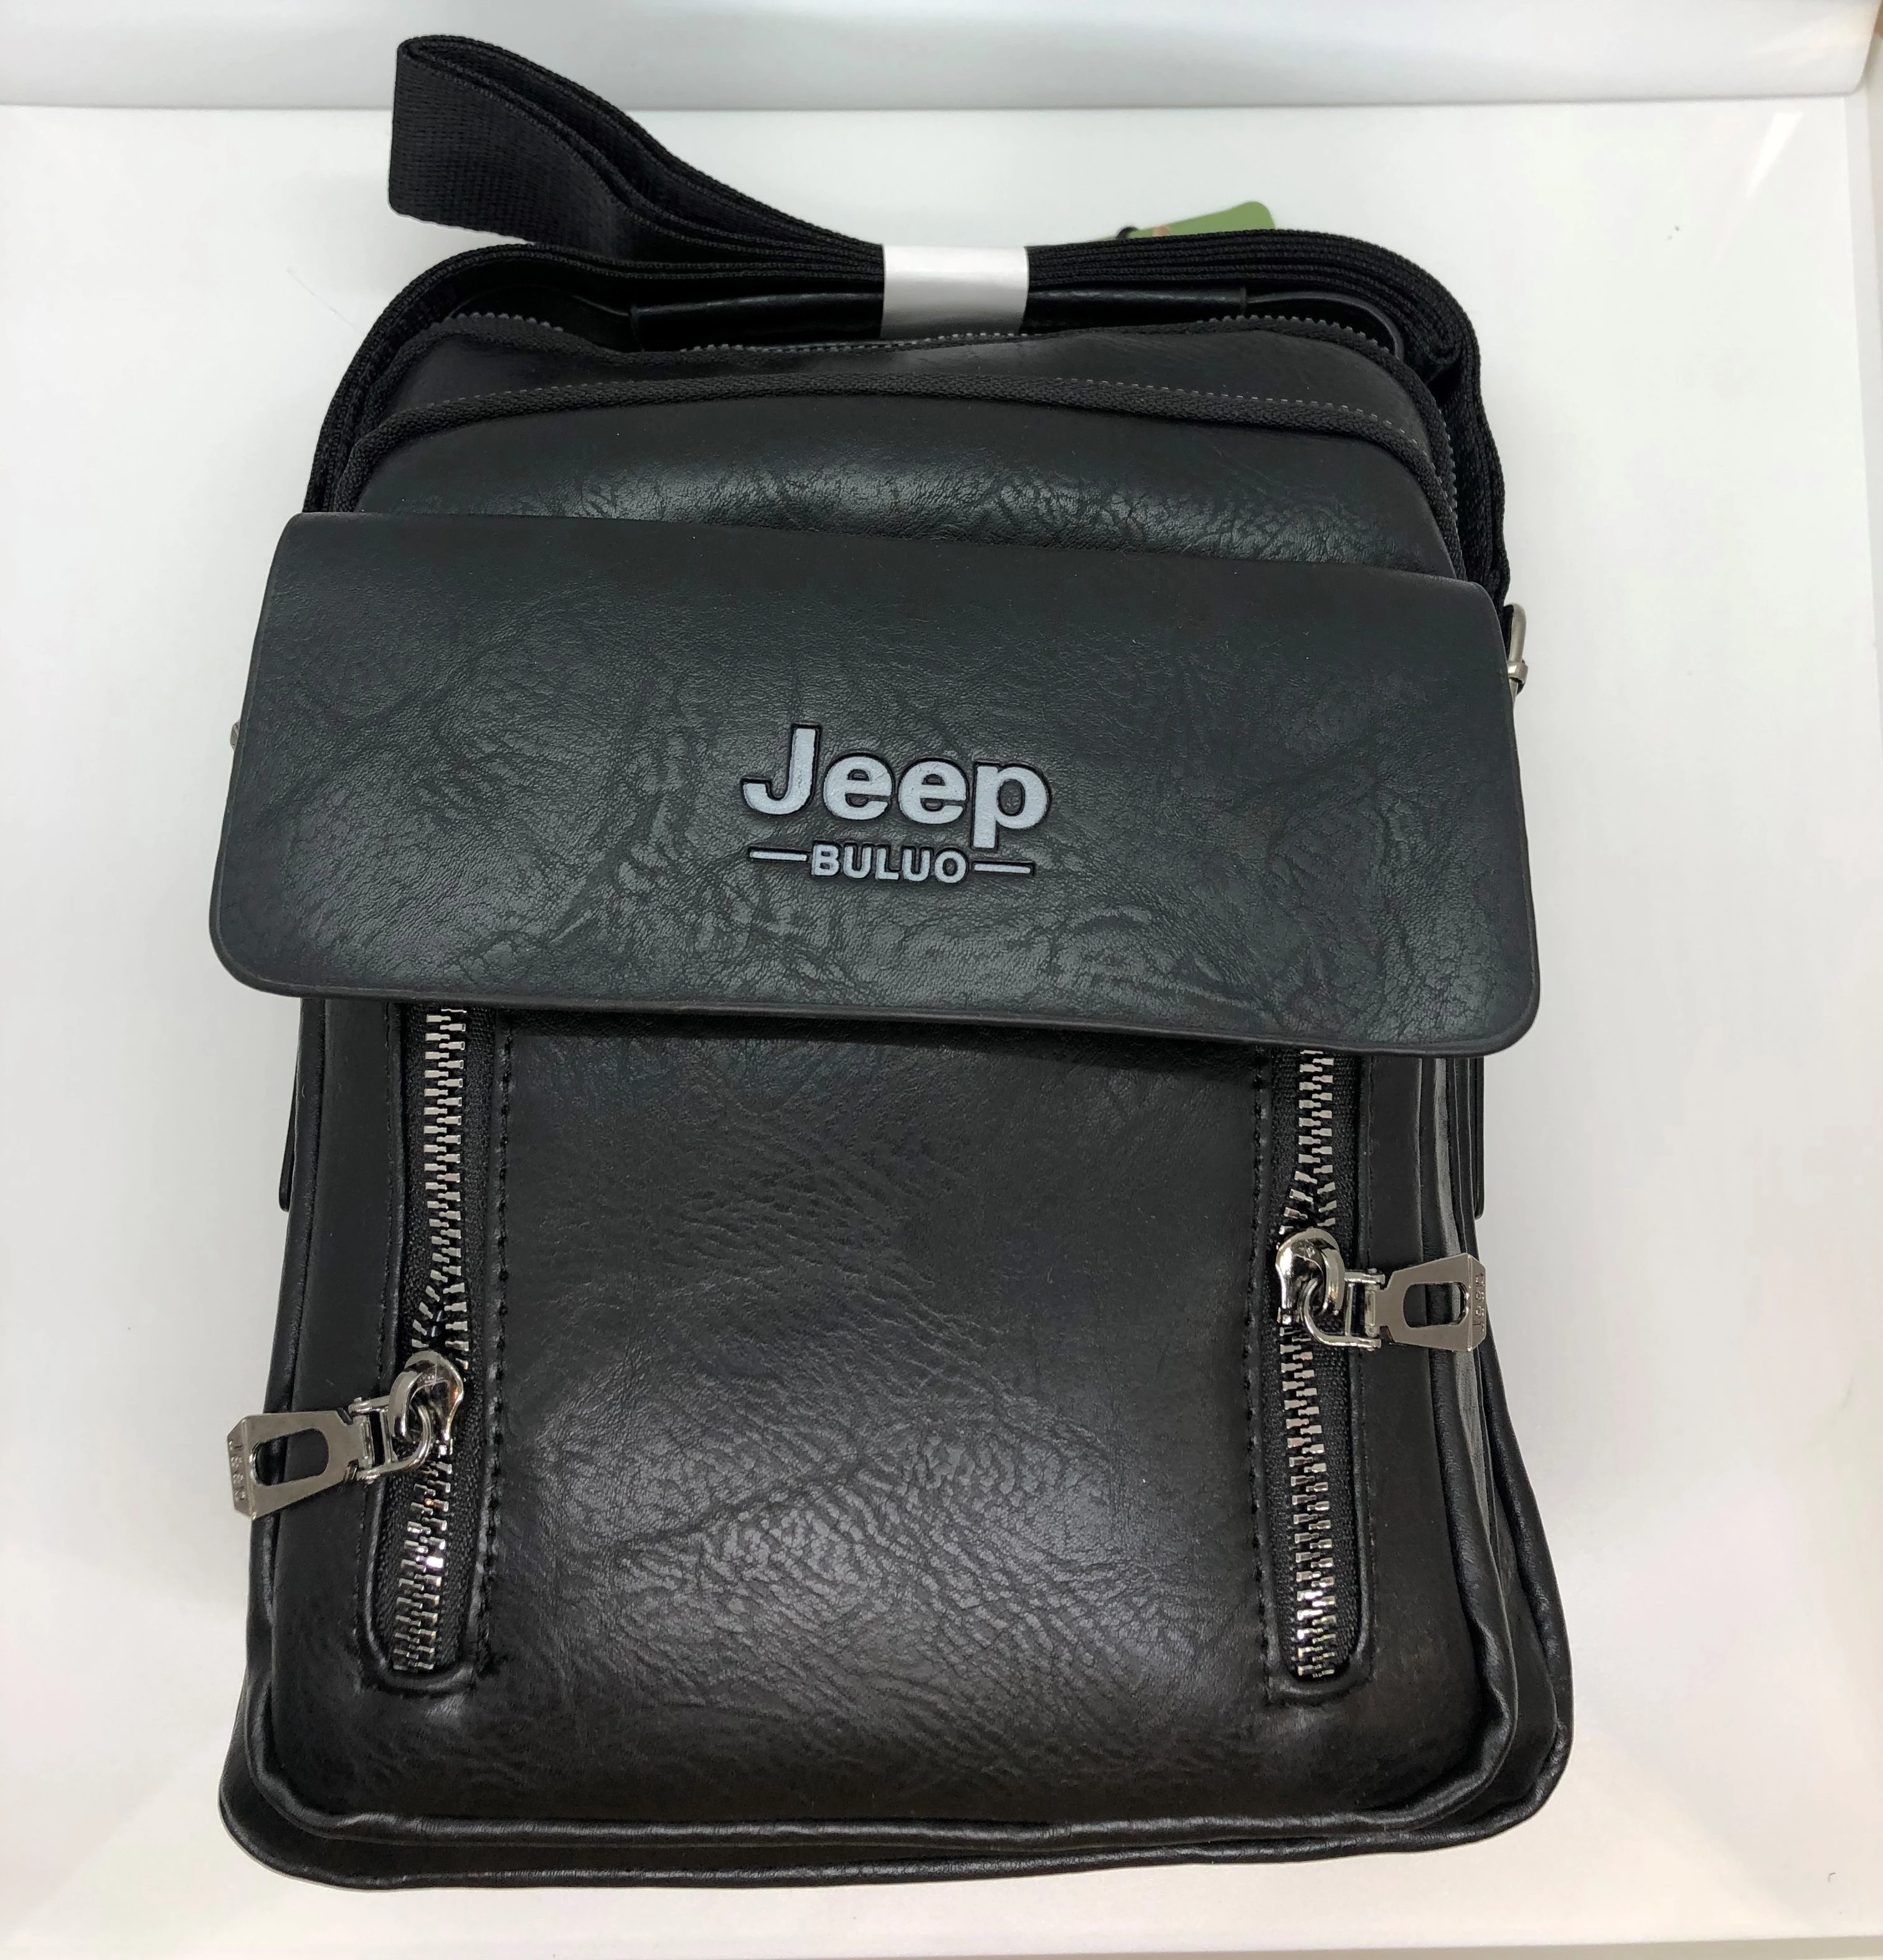 Leather bags from Jeep Cross shoulder strap in hand, black color